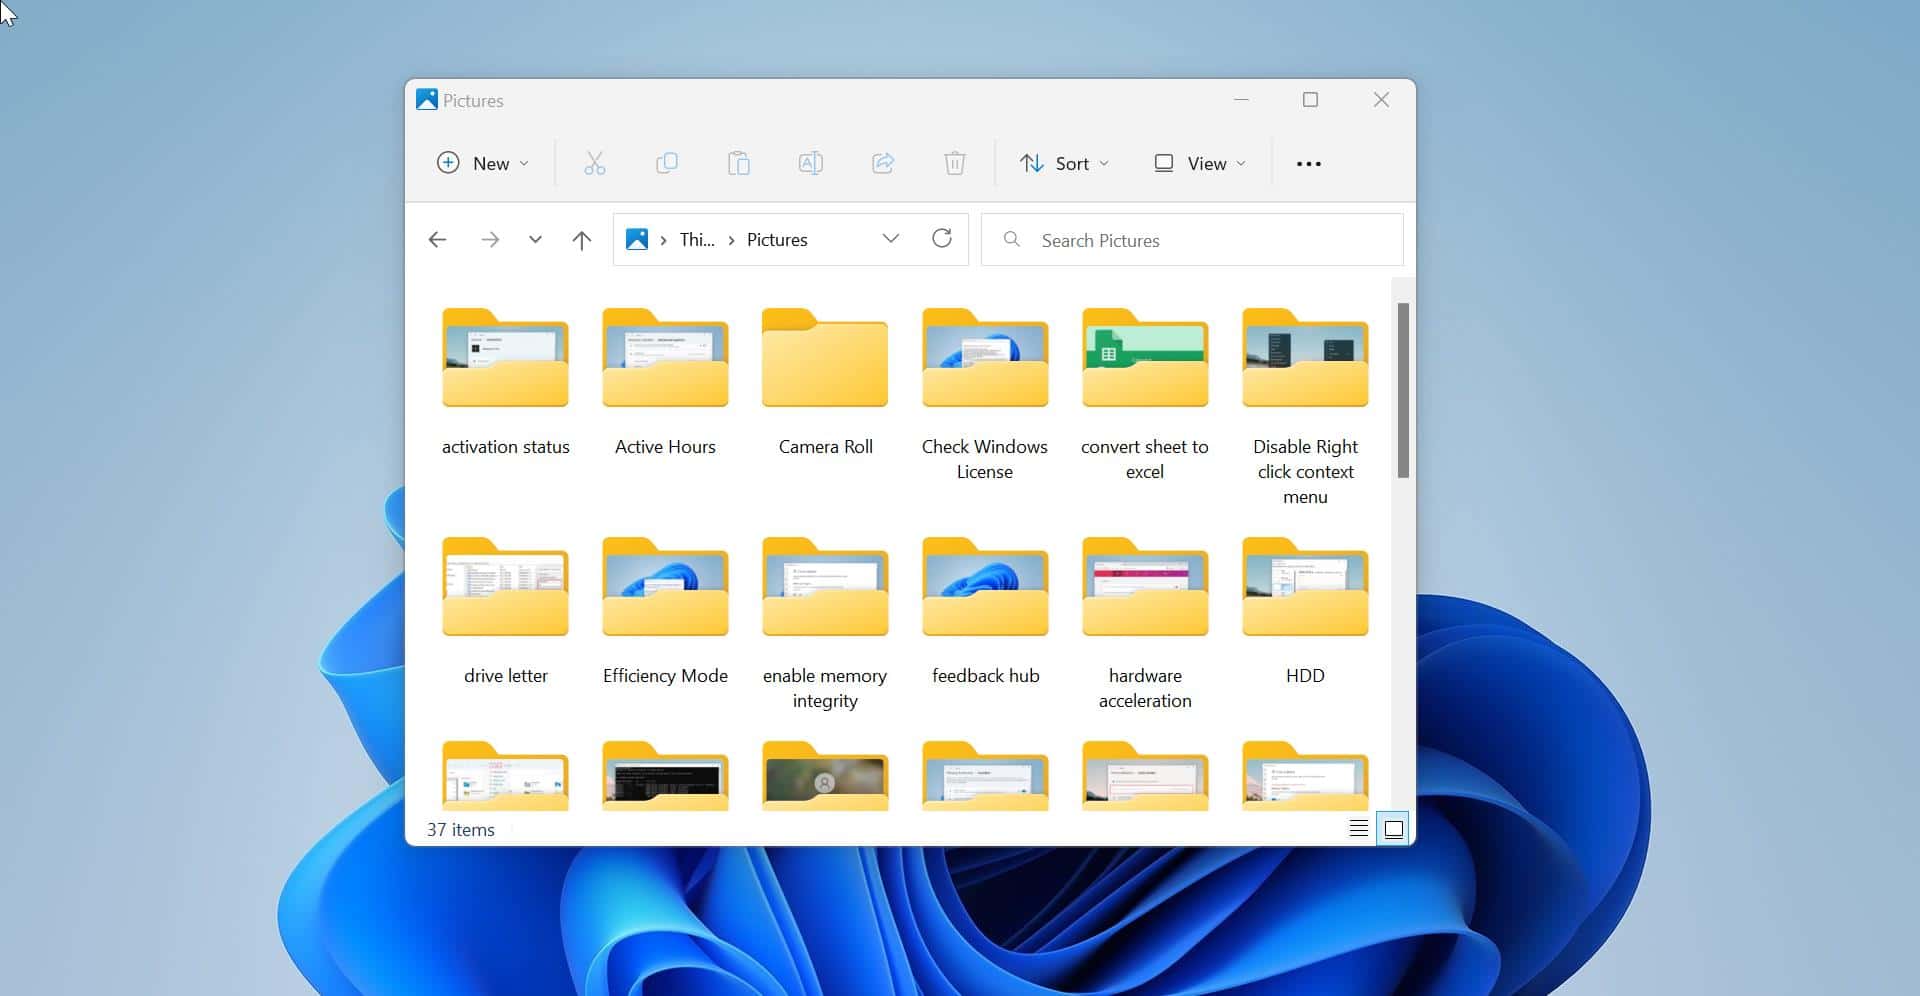 How to Hide the Navigation pane in Windows 11 File Explorer?